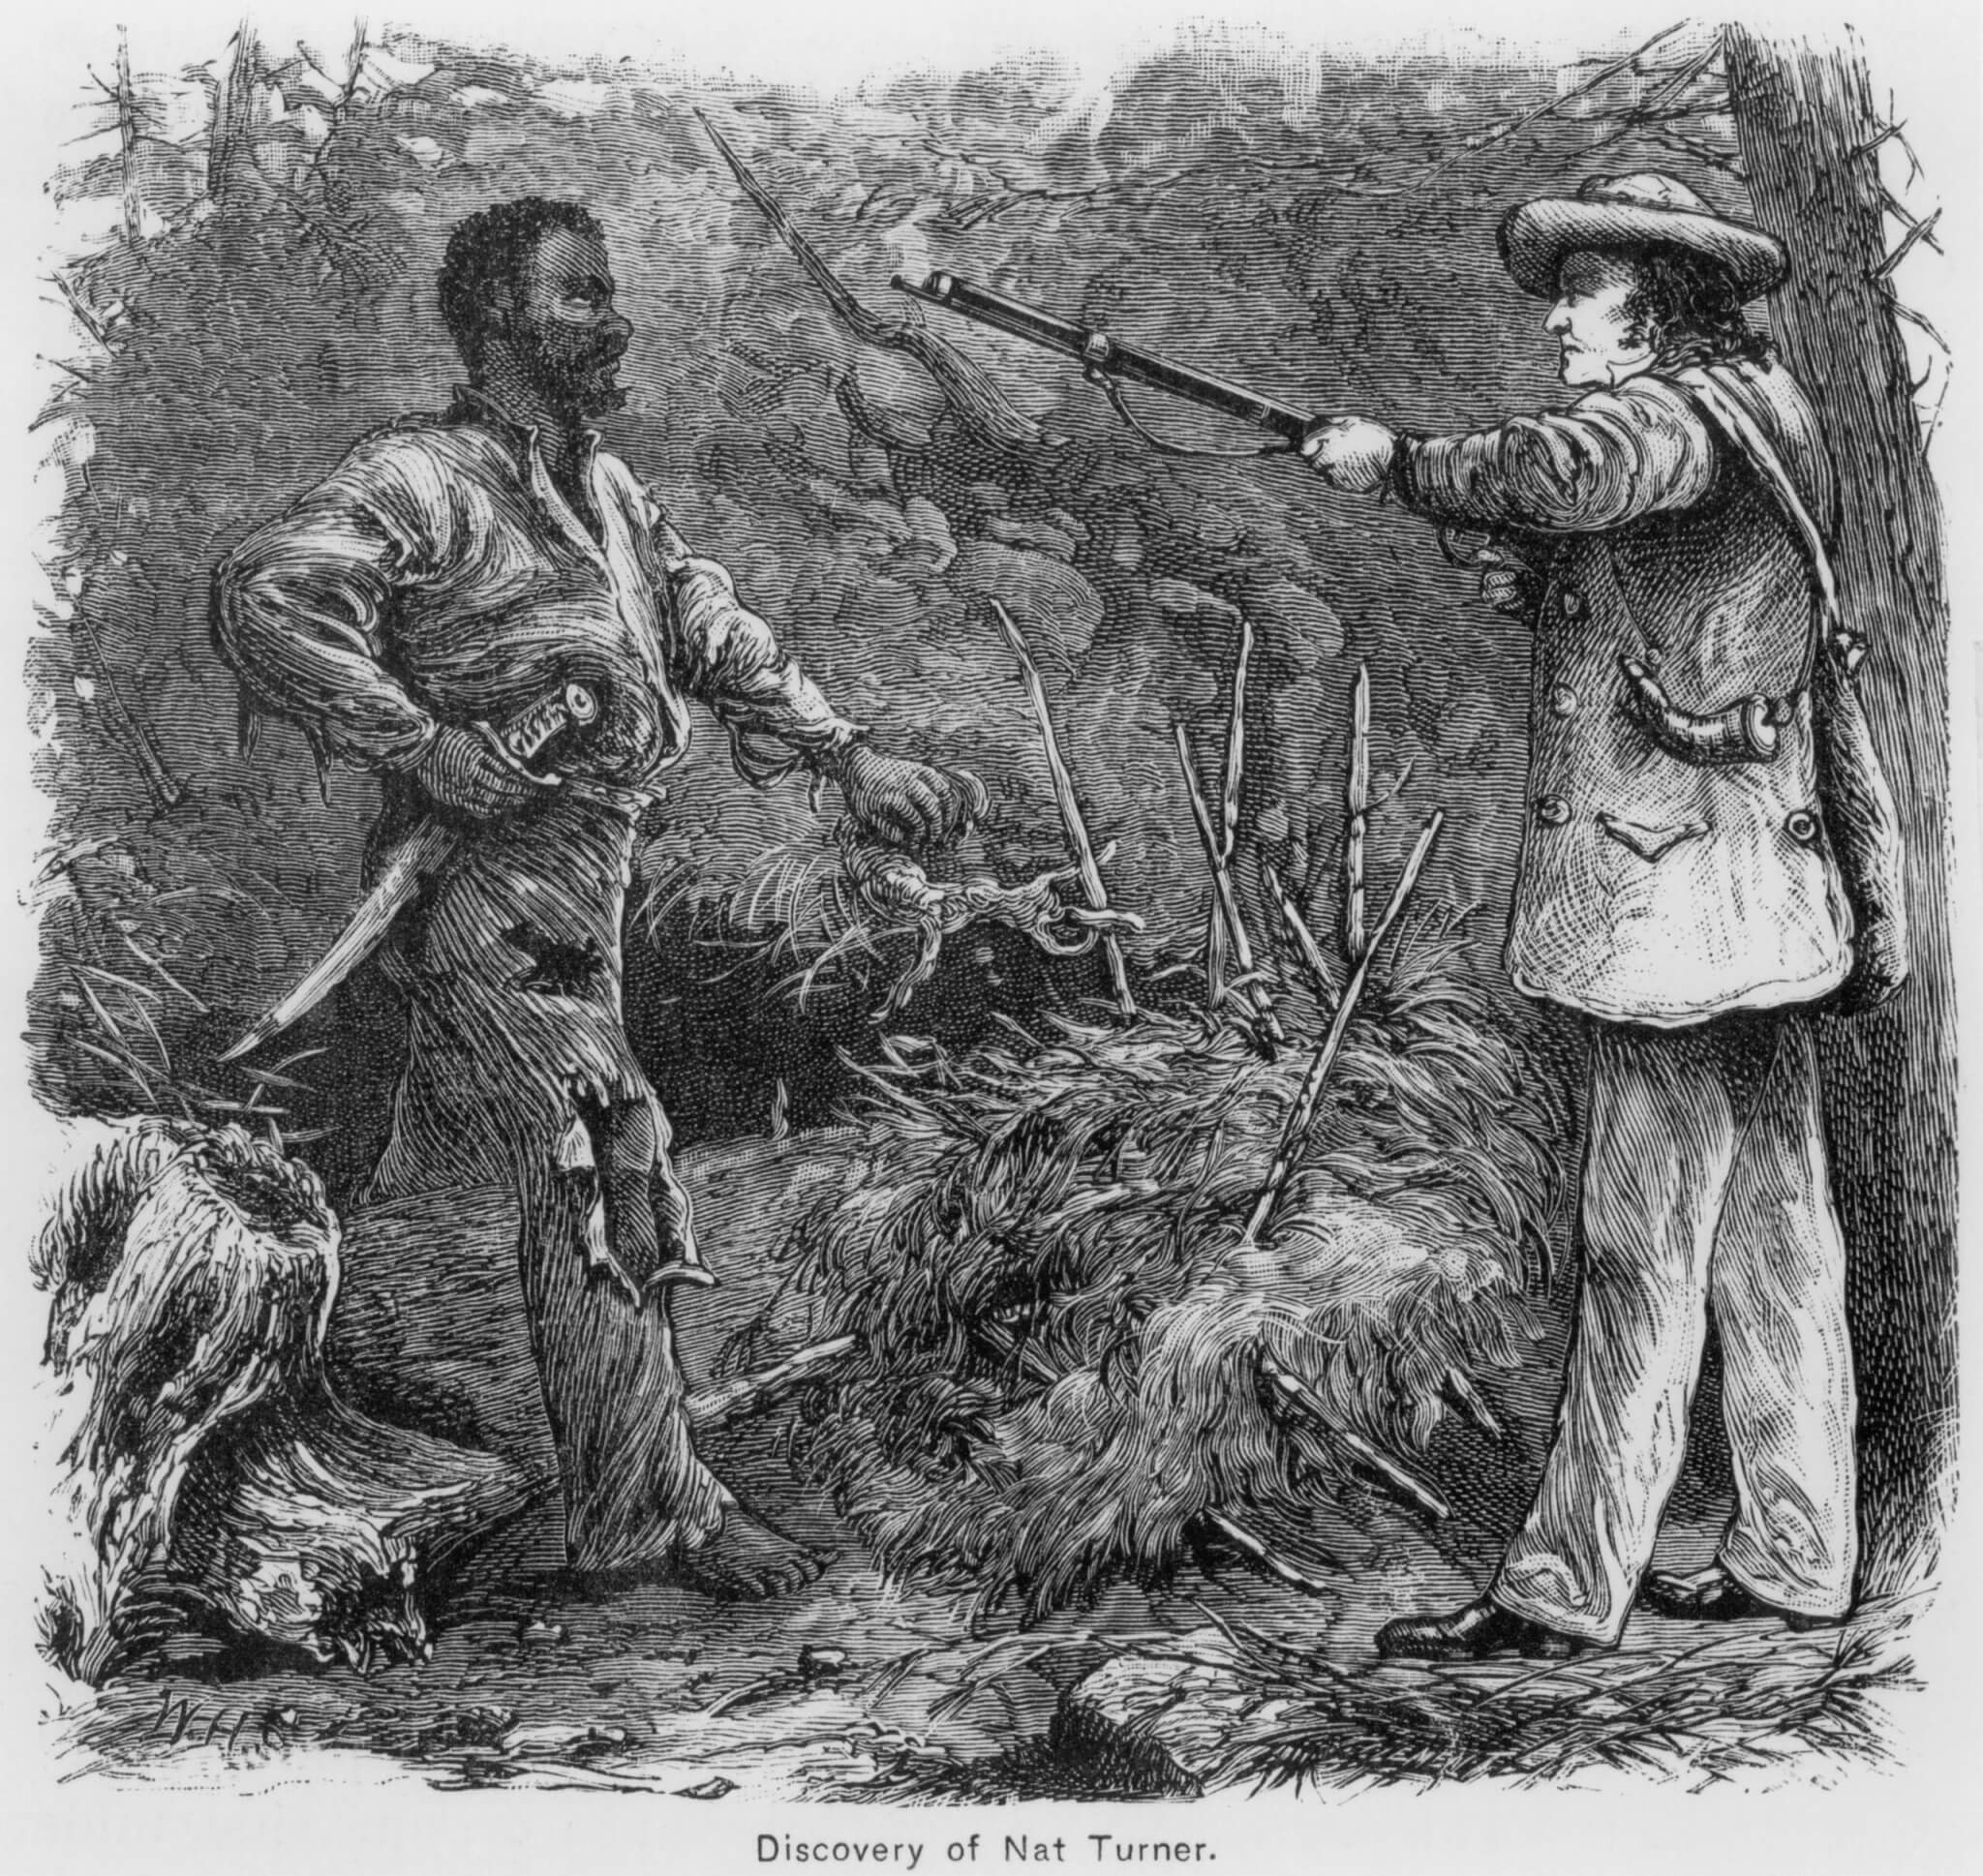 Discovery of Nat Turner (1800-1831), by Benjamin Phipps on October 30, 1831. Turner eluded capture for two months, he was discovered hiding in a cave. Engraving by William Henry Shelton (1840-1890).